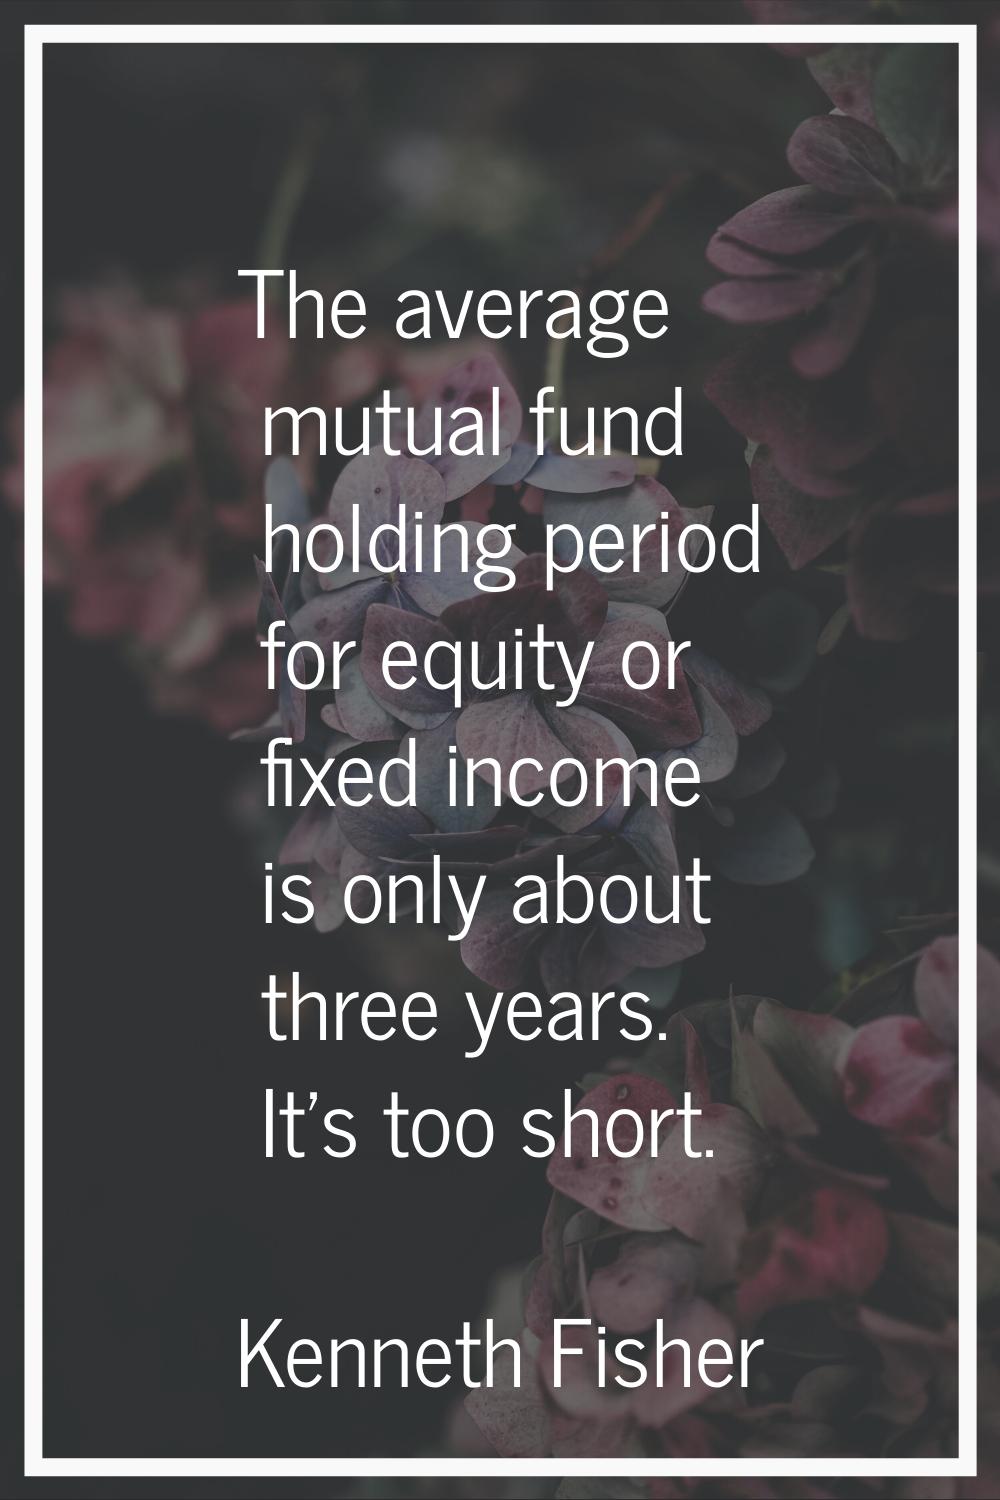 The average mutual fund holding period for equity or fixed income is only about three years. It's t